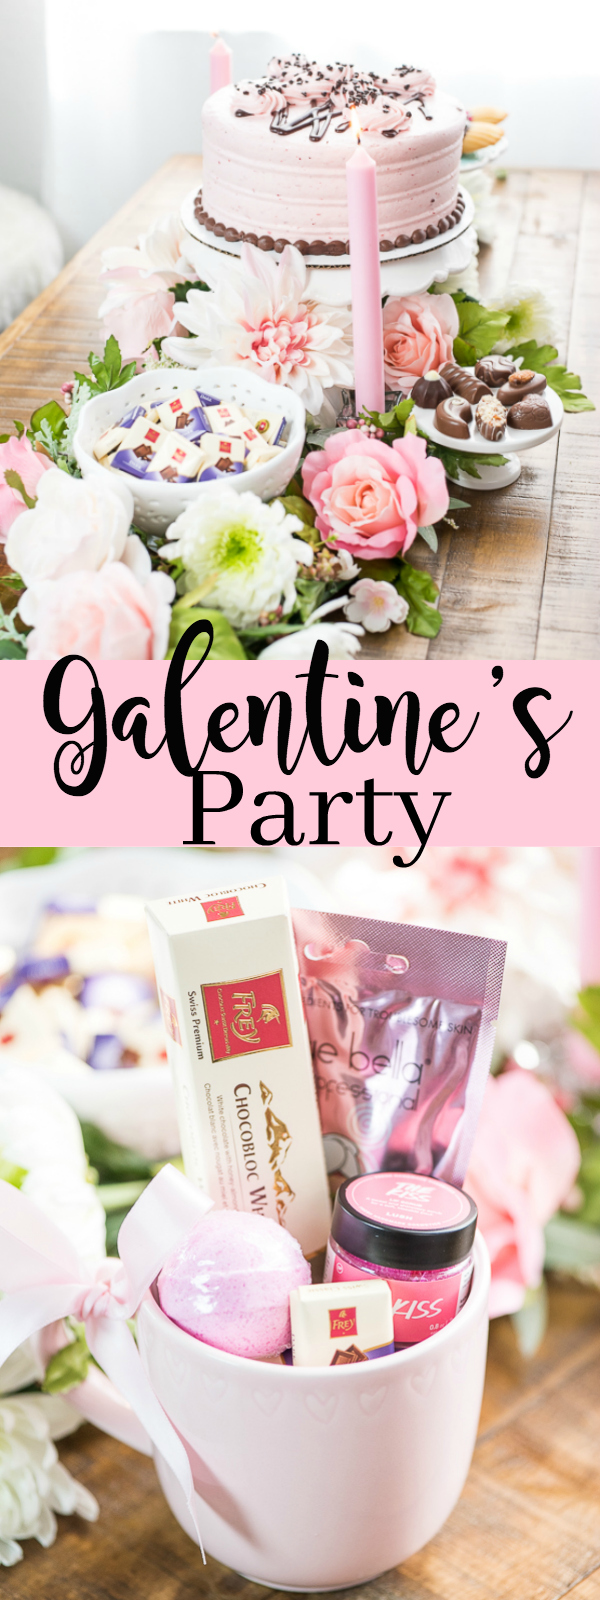 Galentines-Party-Ideas